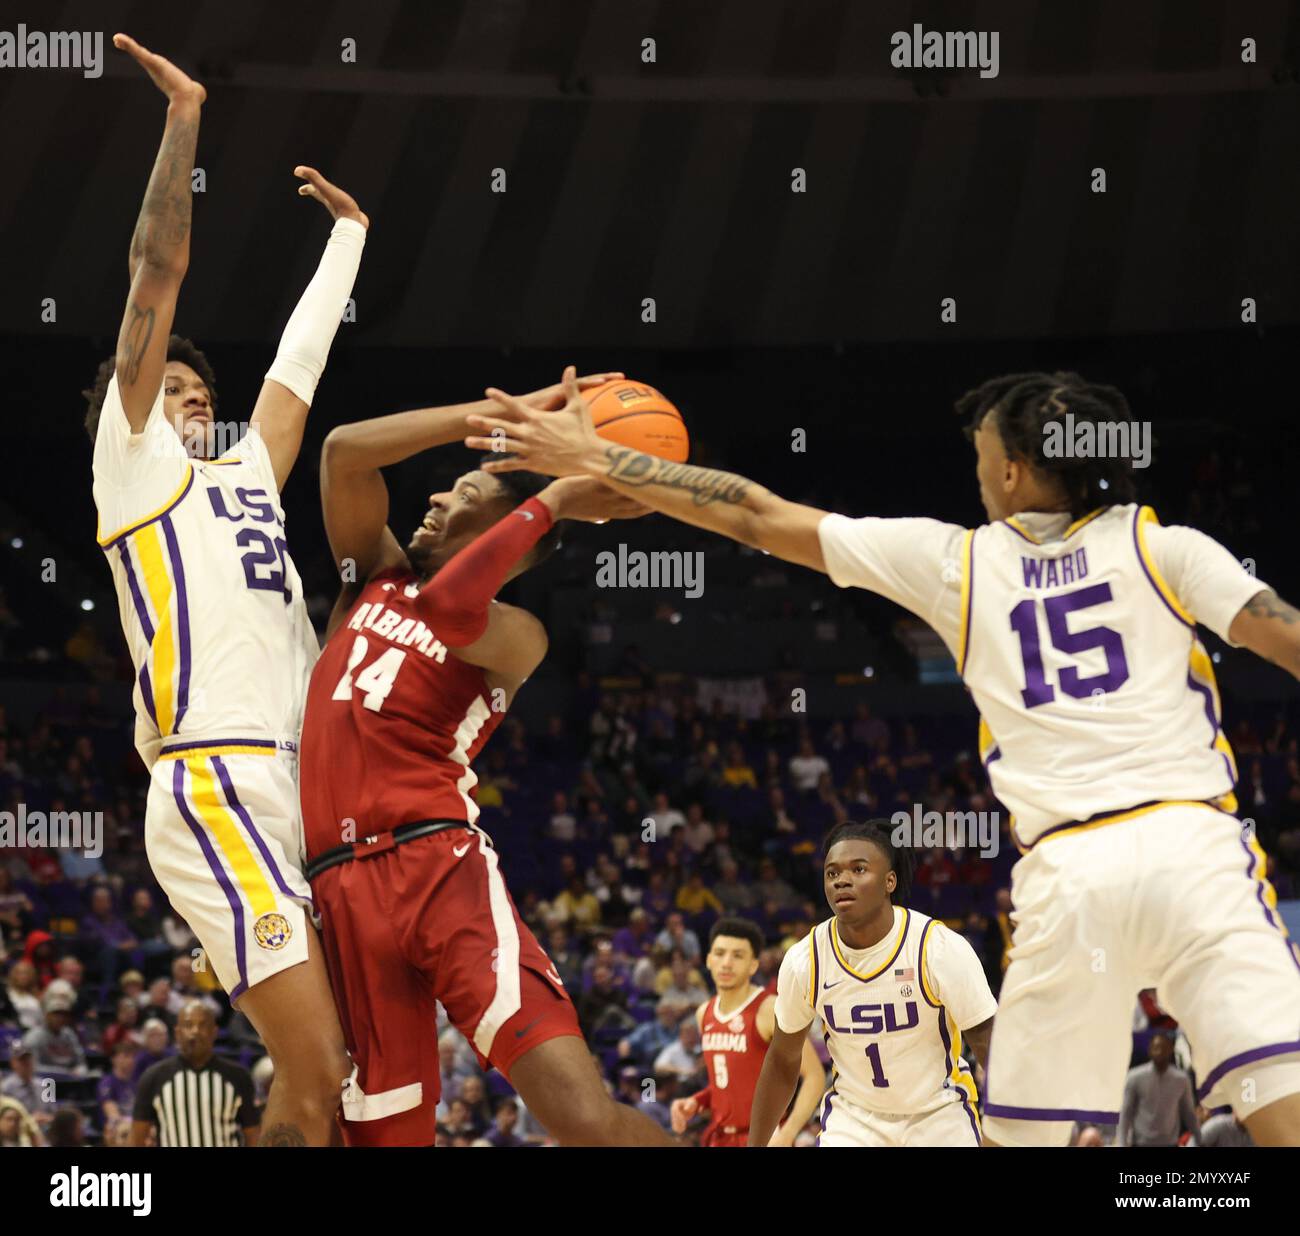 Baton Rouge, USA. 04th Feb, 2023. LSU Tigers forward Tyrell Ward (15) blocks Alabama Crimson Tide forward Brandon Miller (24) shot during a men's college basketball game at the Pete Maravich Assembly Center in Baton Rouge, Louisiana on Saturday, February 4, 2023. (Photo by Peter G. Forest/Sipa USA) Credit: Sipa USA/Alamy Live News Stock Photo